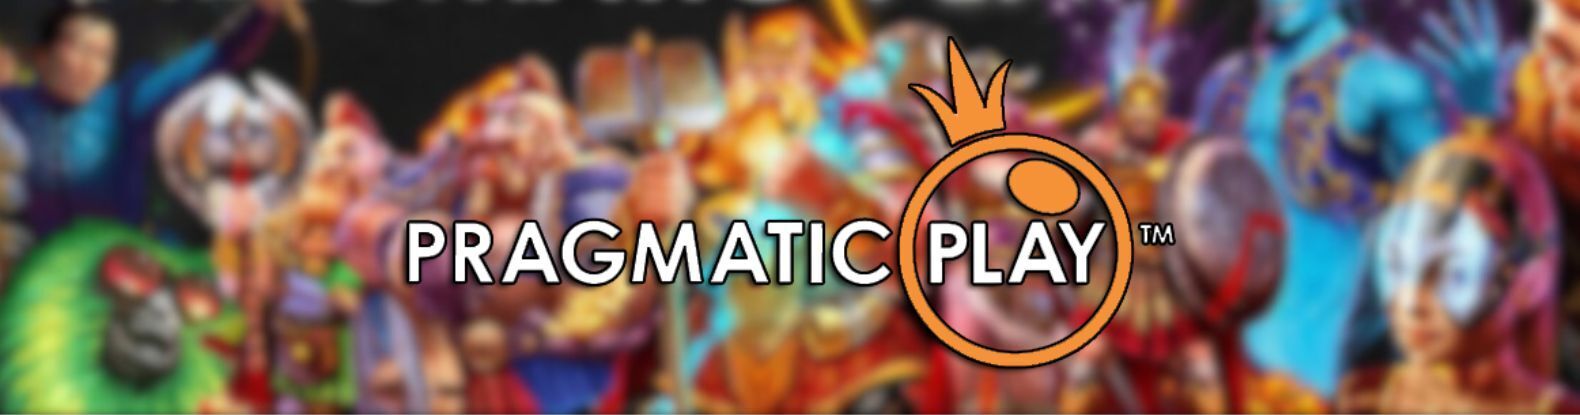 This is a decorative pic of Pragmatic Play logo